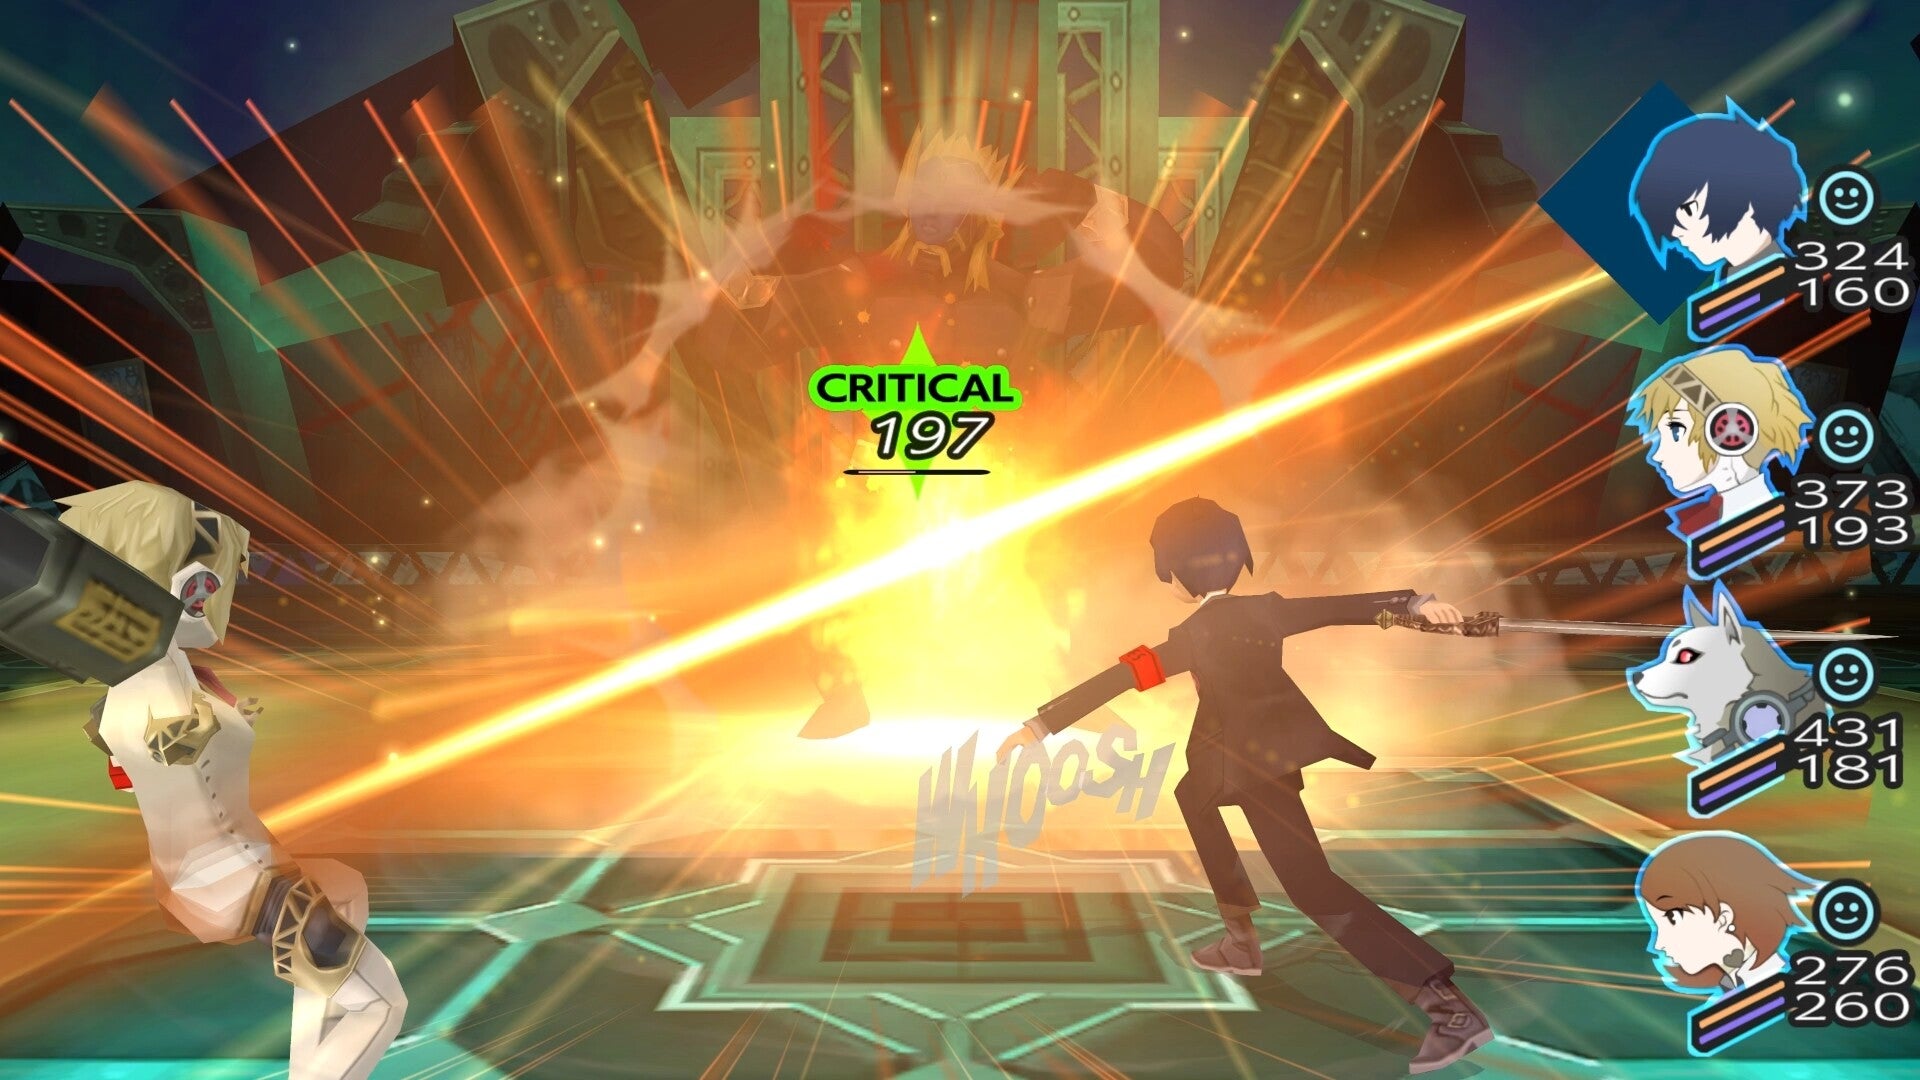 The player delivers a devastating critical attack with a slash of their katana in Persona 3.